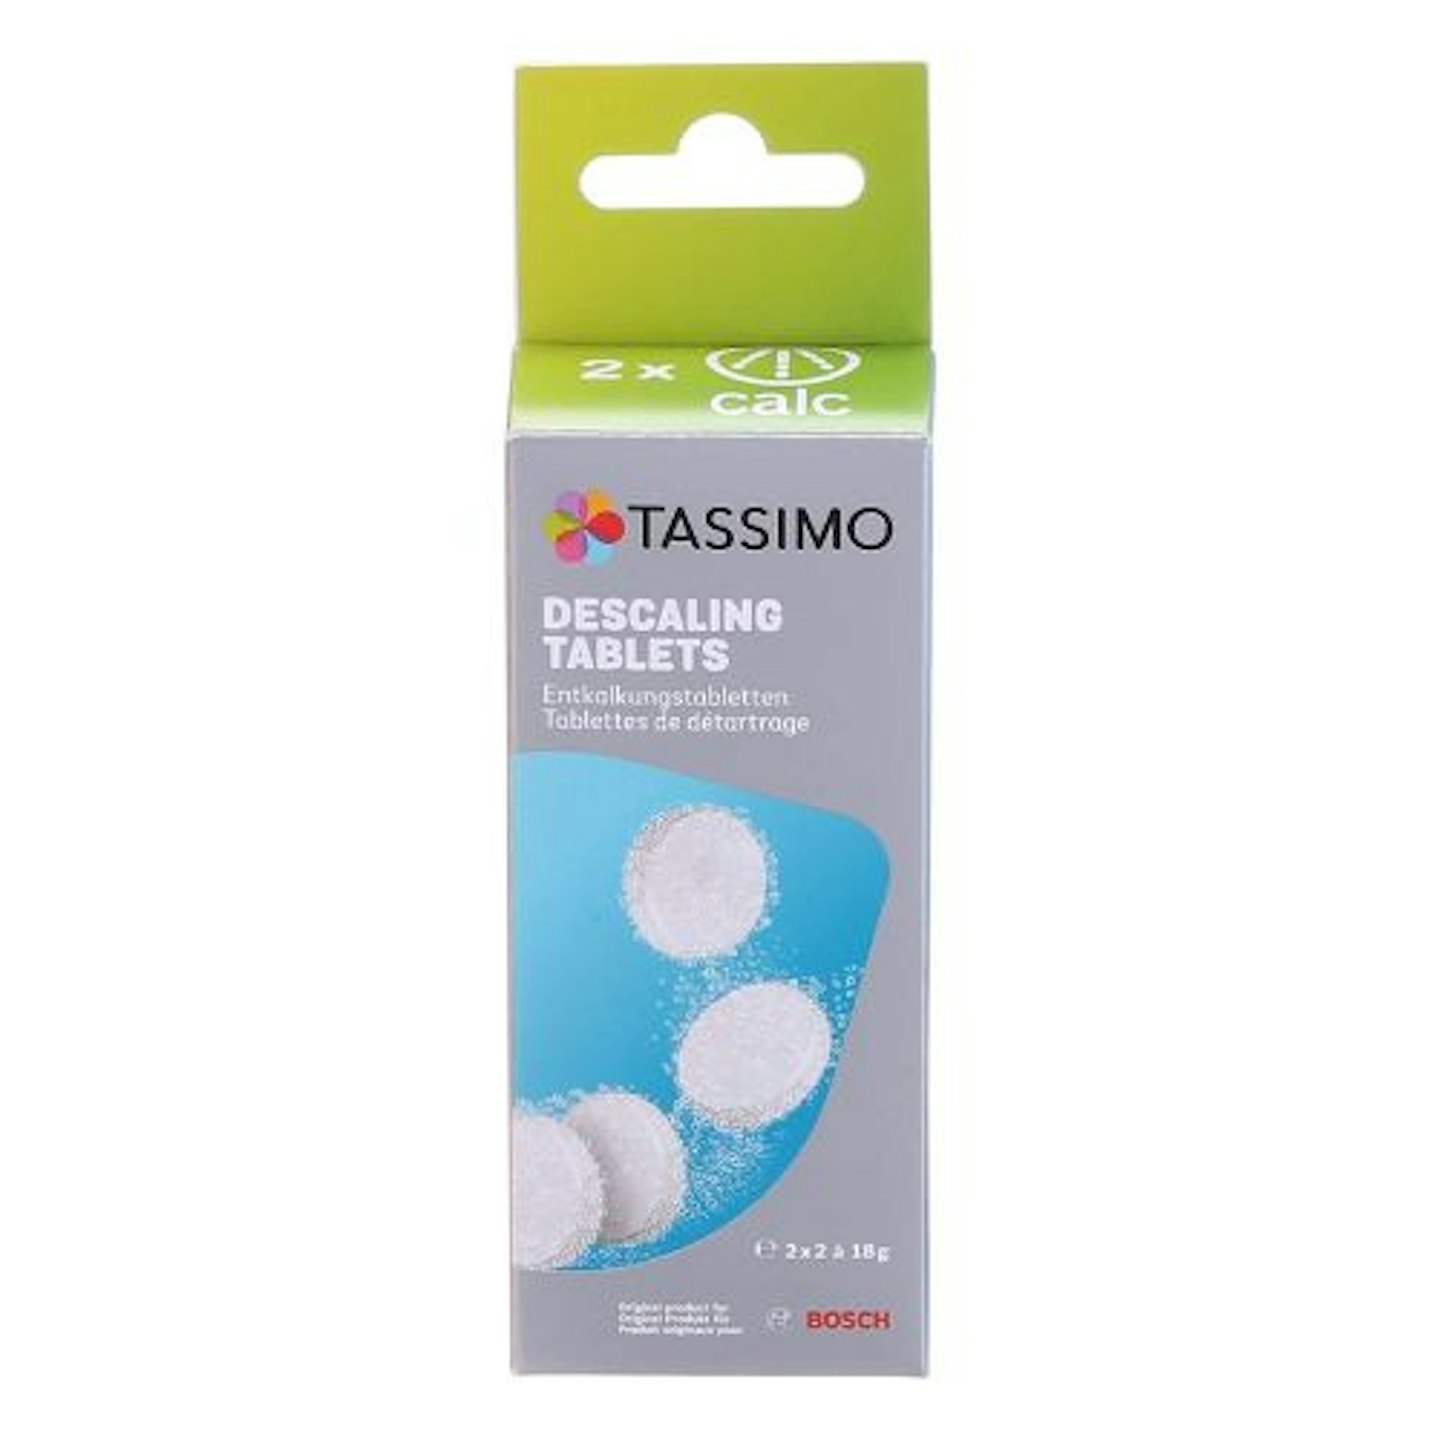 Tassimo by Bosch TCZ6004 Descaling Tablets